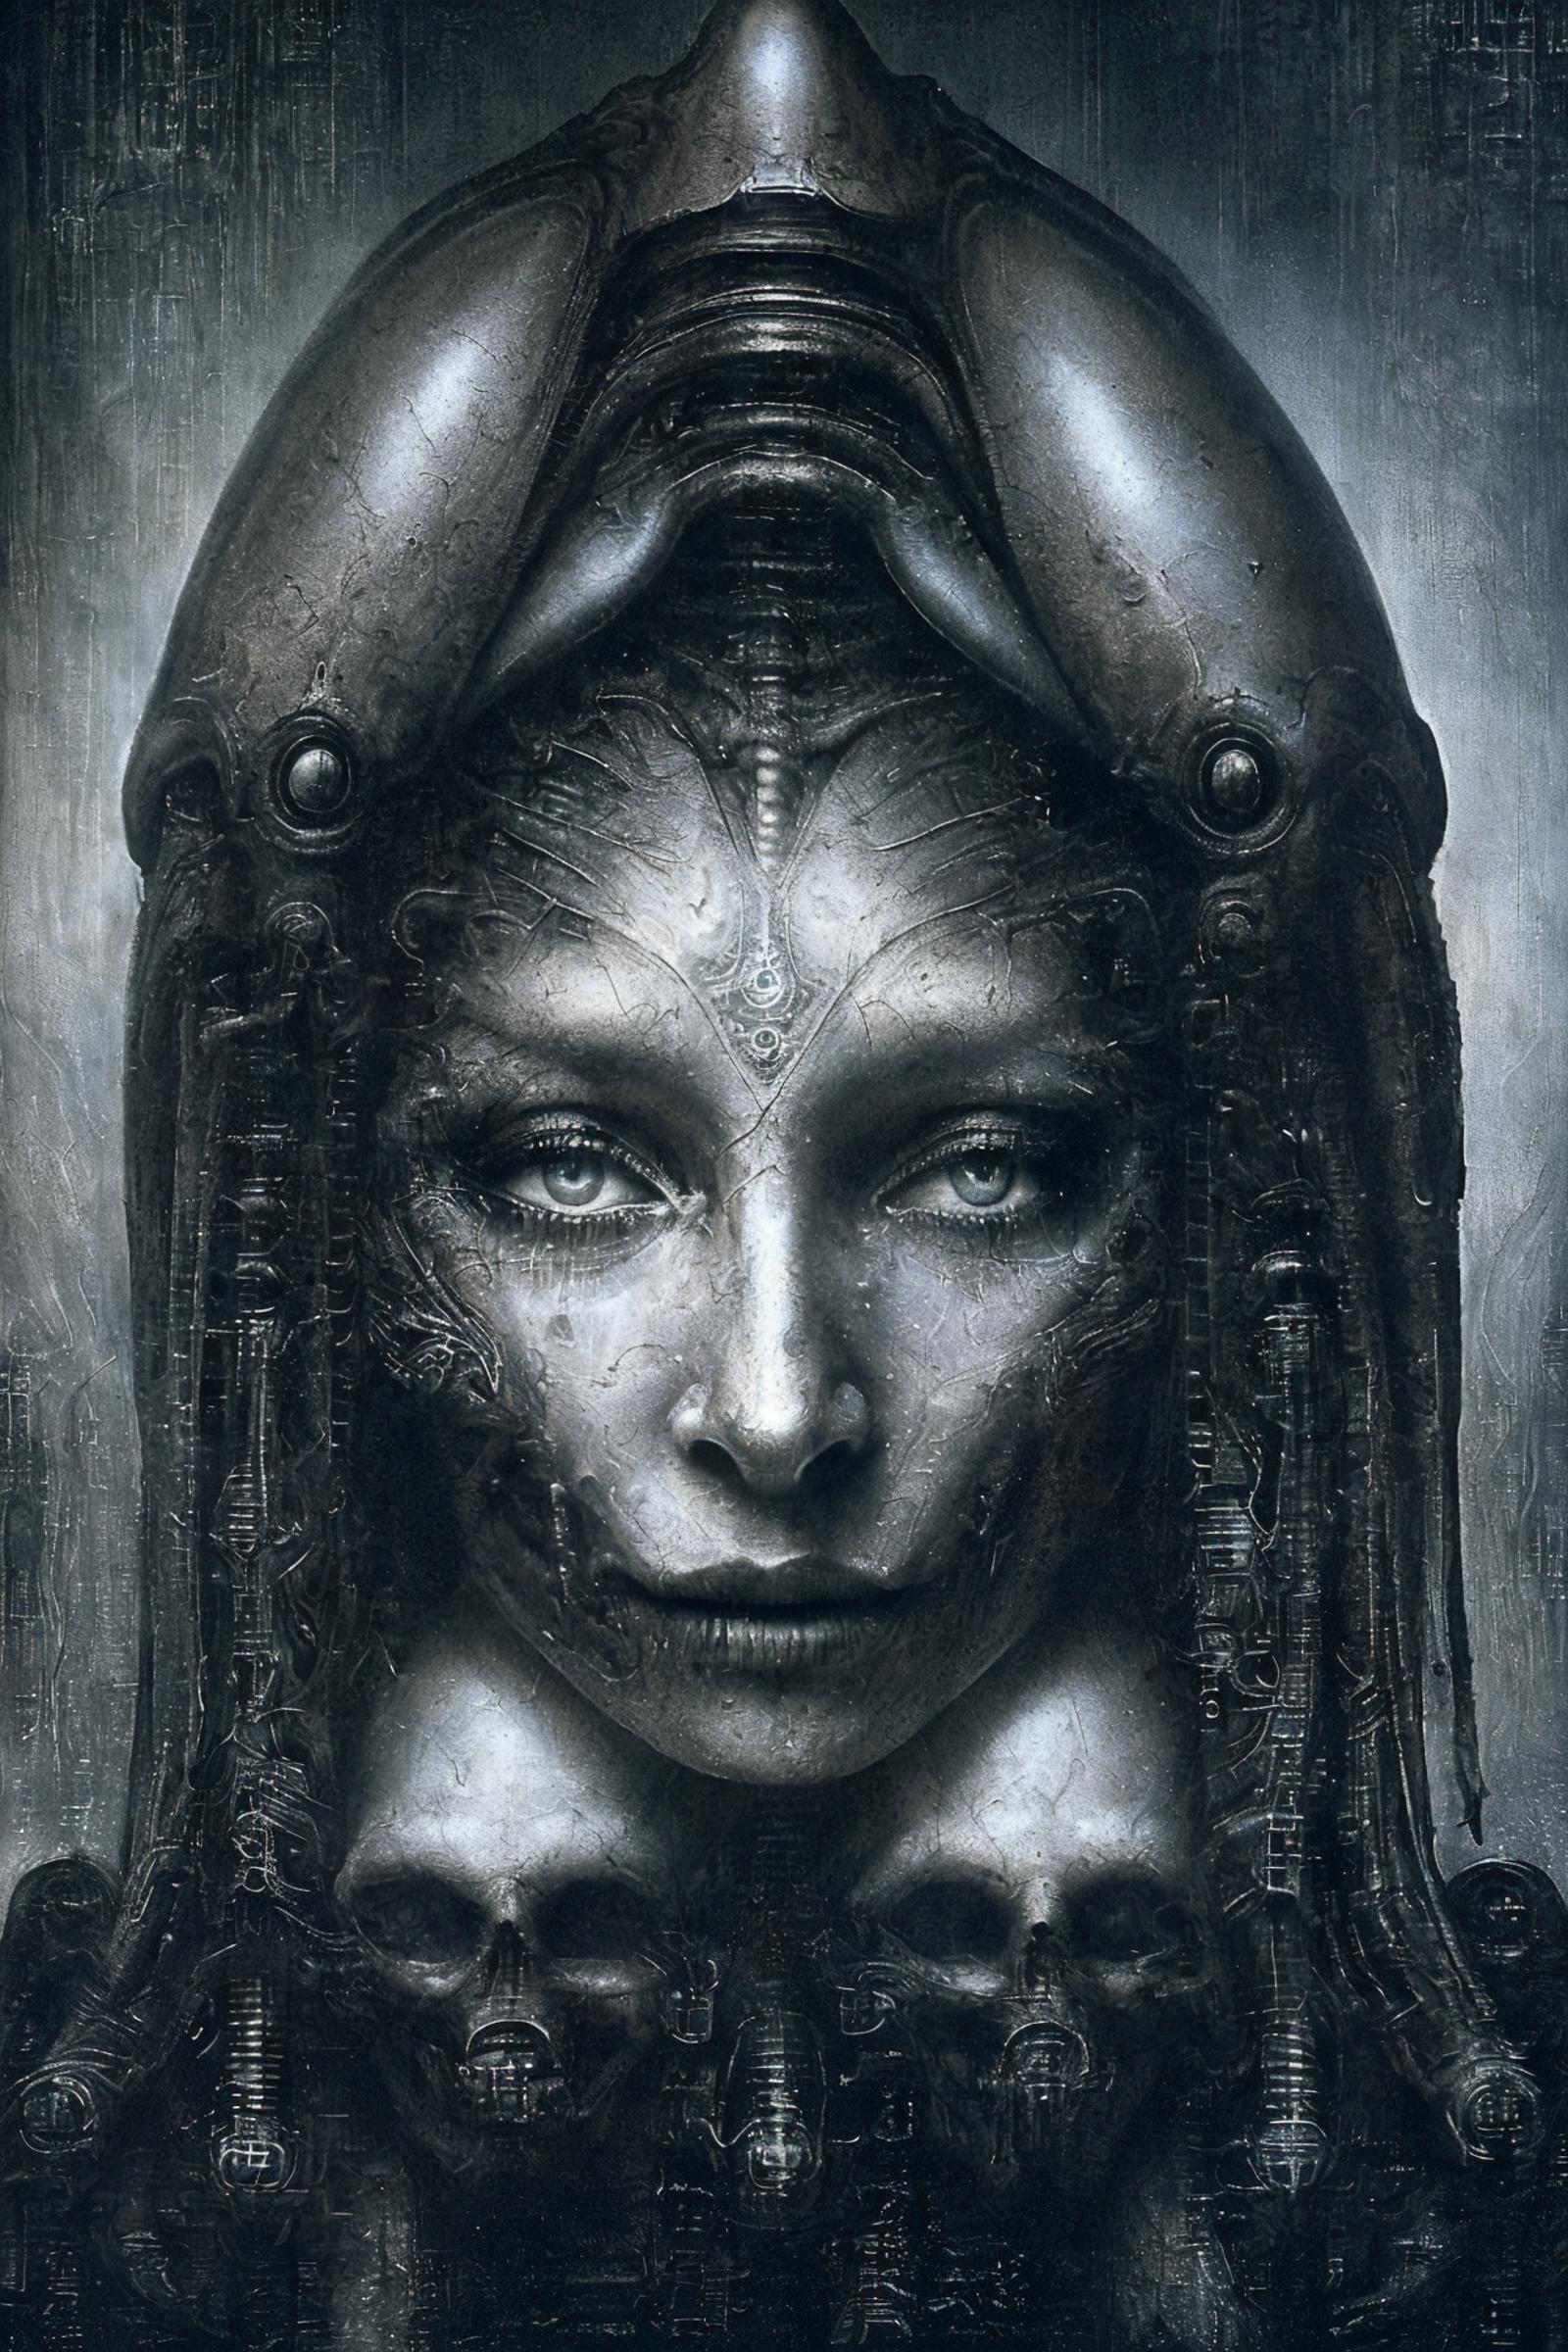 H.R.Giger - ArtStyle image by garand343635